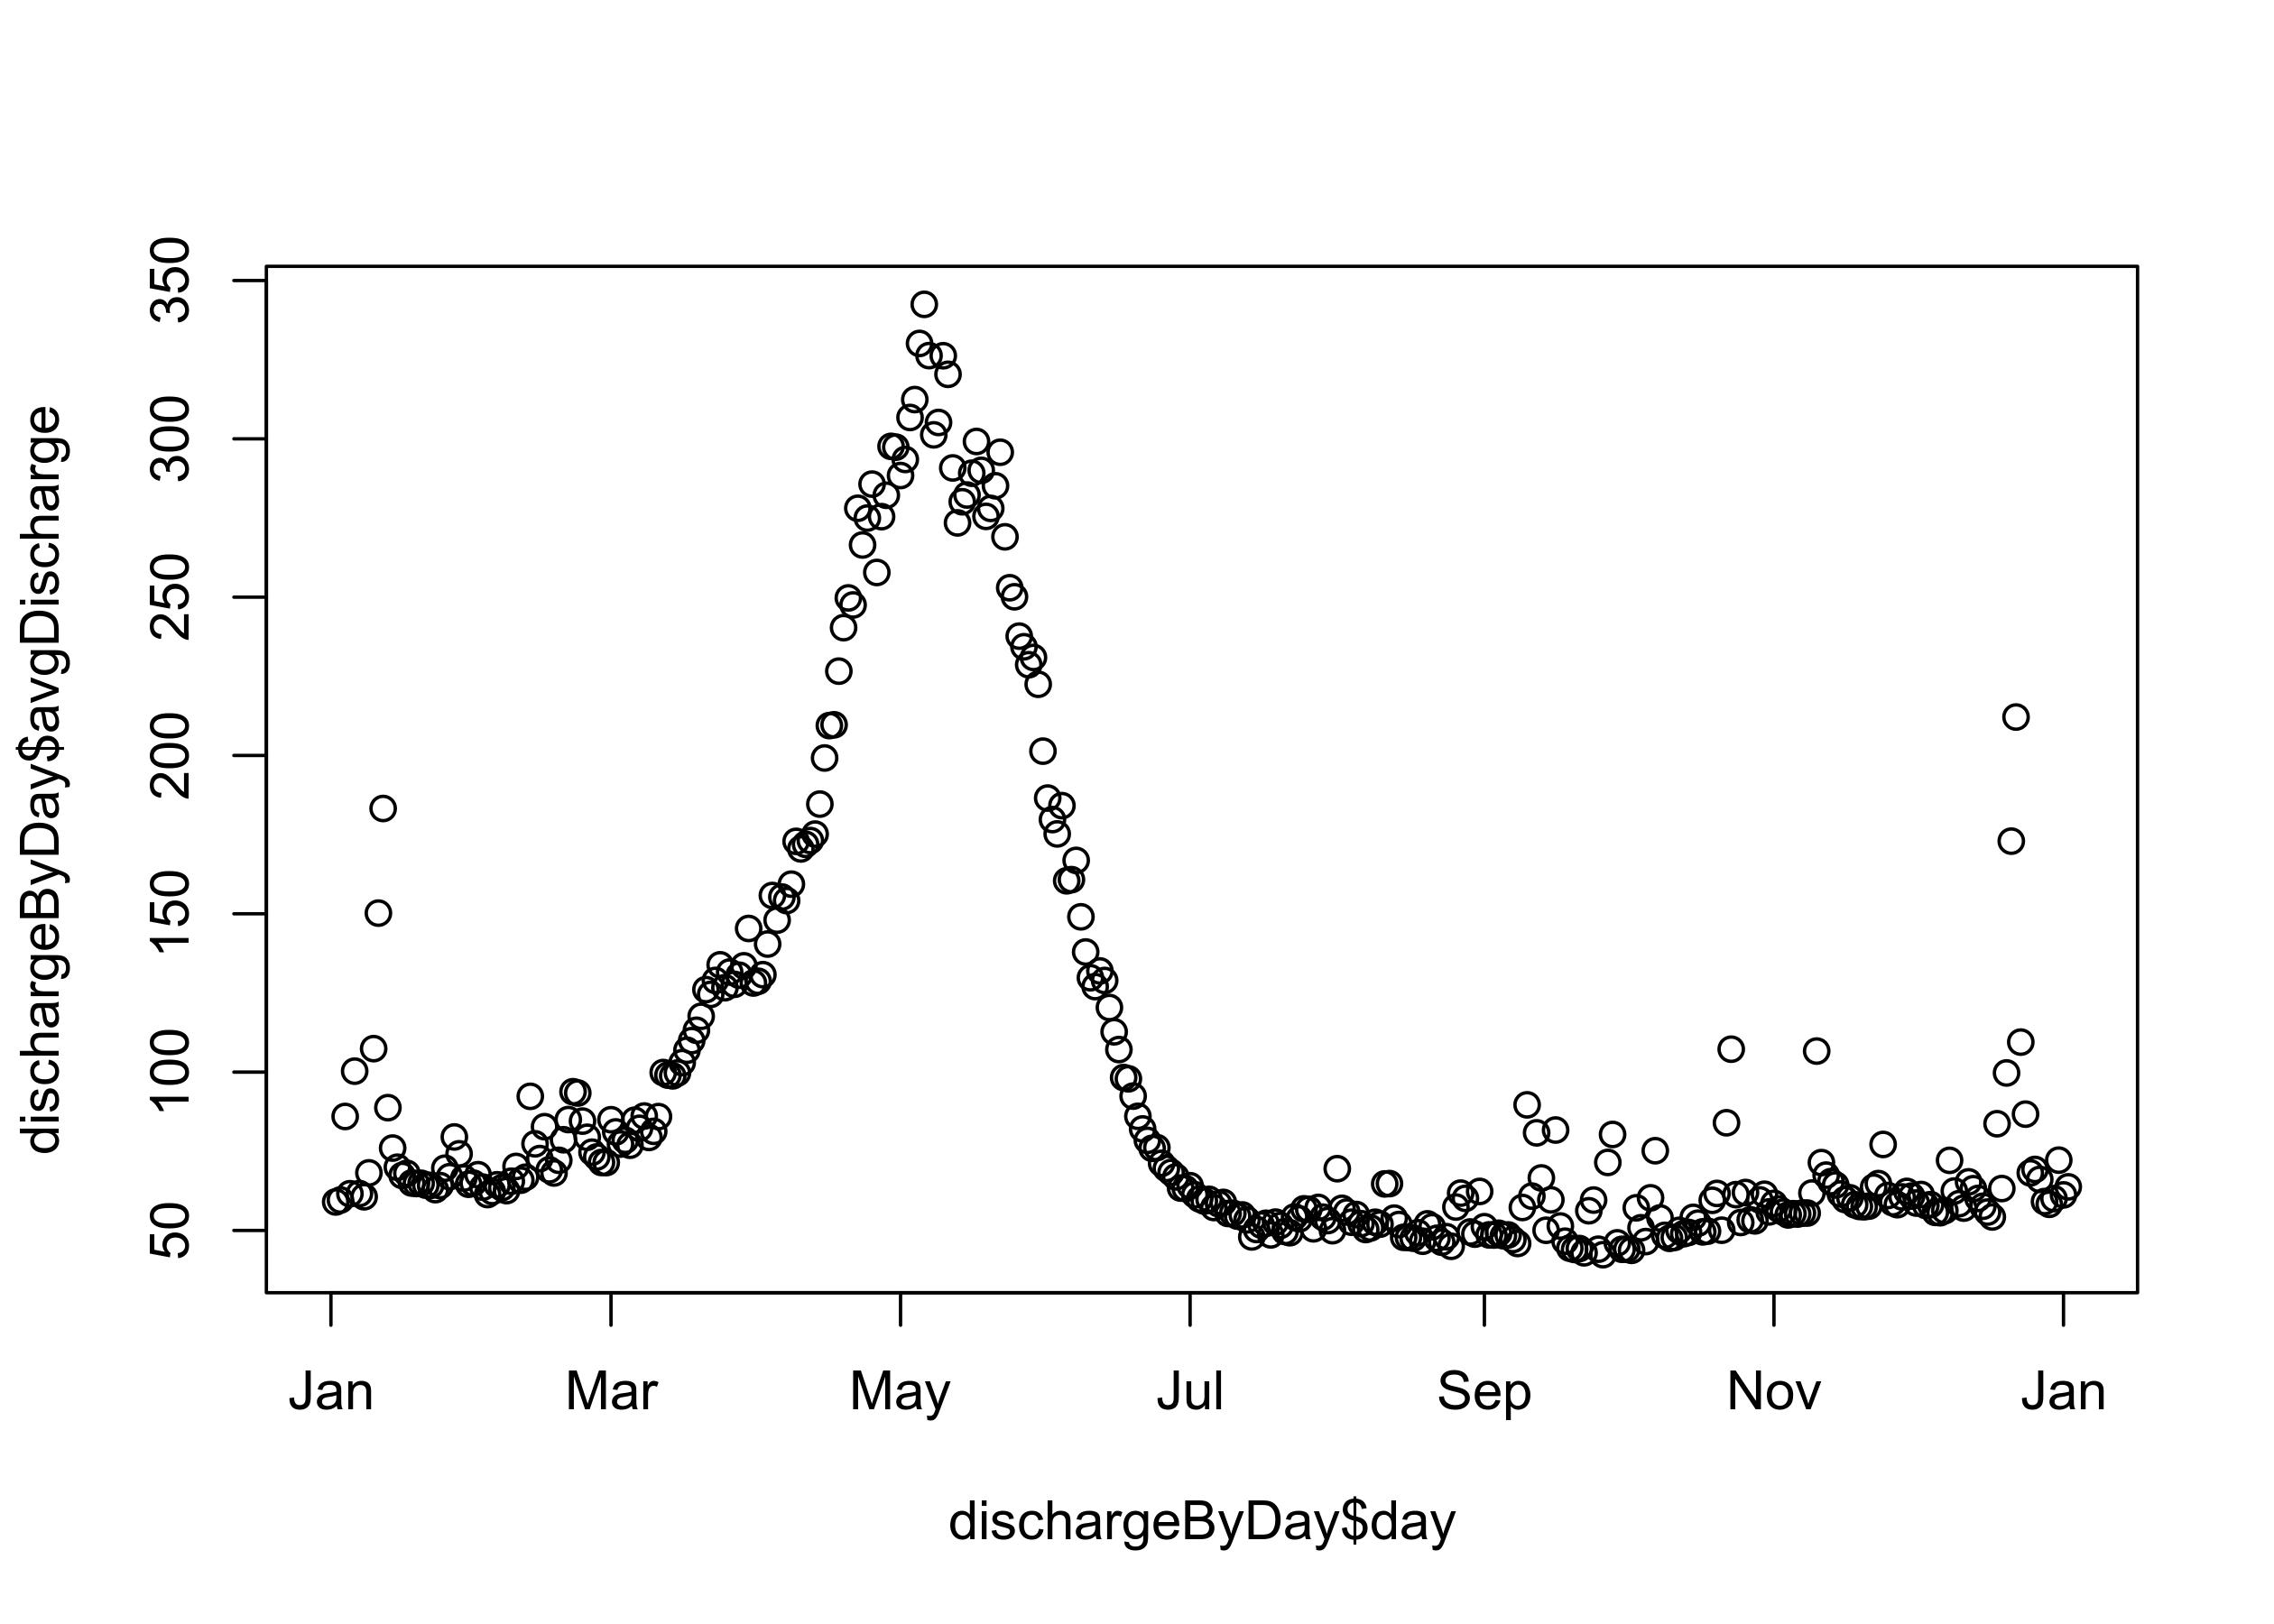 Scatterplot: on average from 1993 to 2018, after about 100 days and lasting until about the 160th day (April 10th - June 10th), the discharge level breaks the 150 cfs threshold that closes The Narrows hiking route